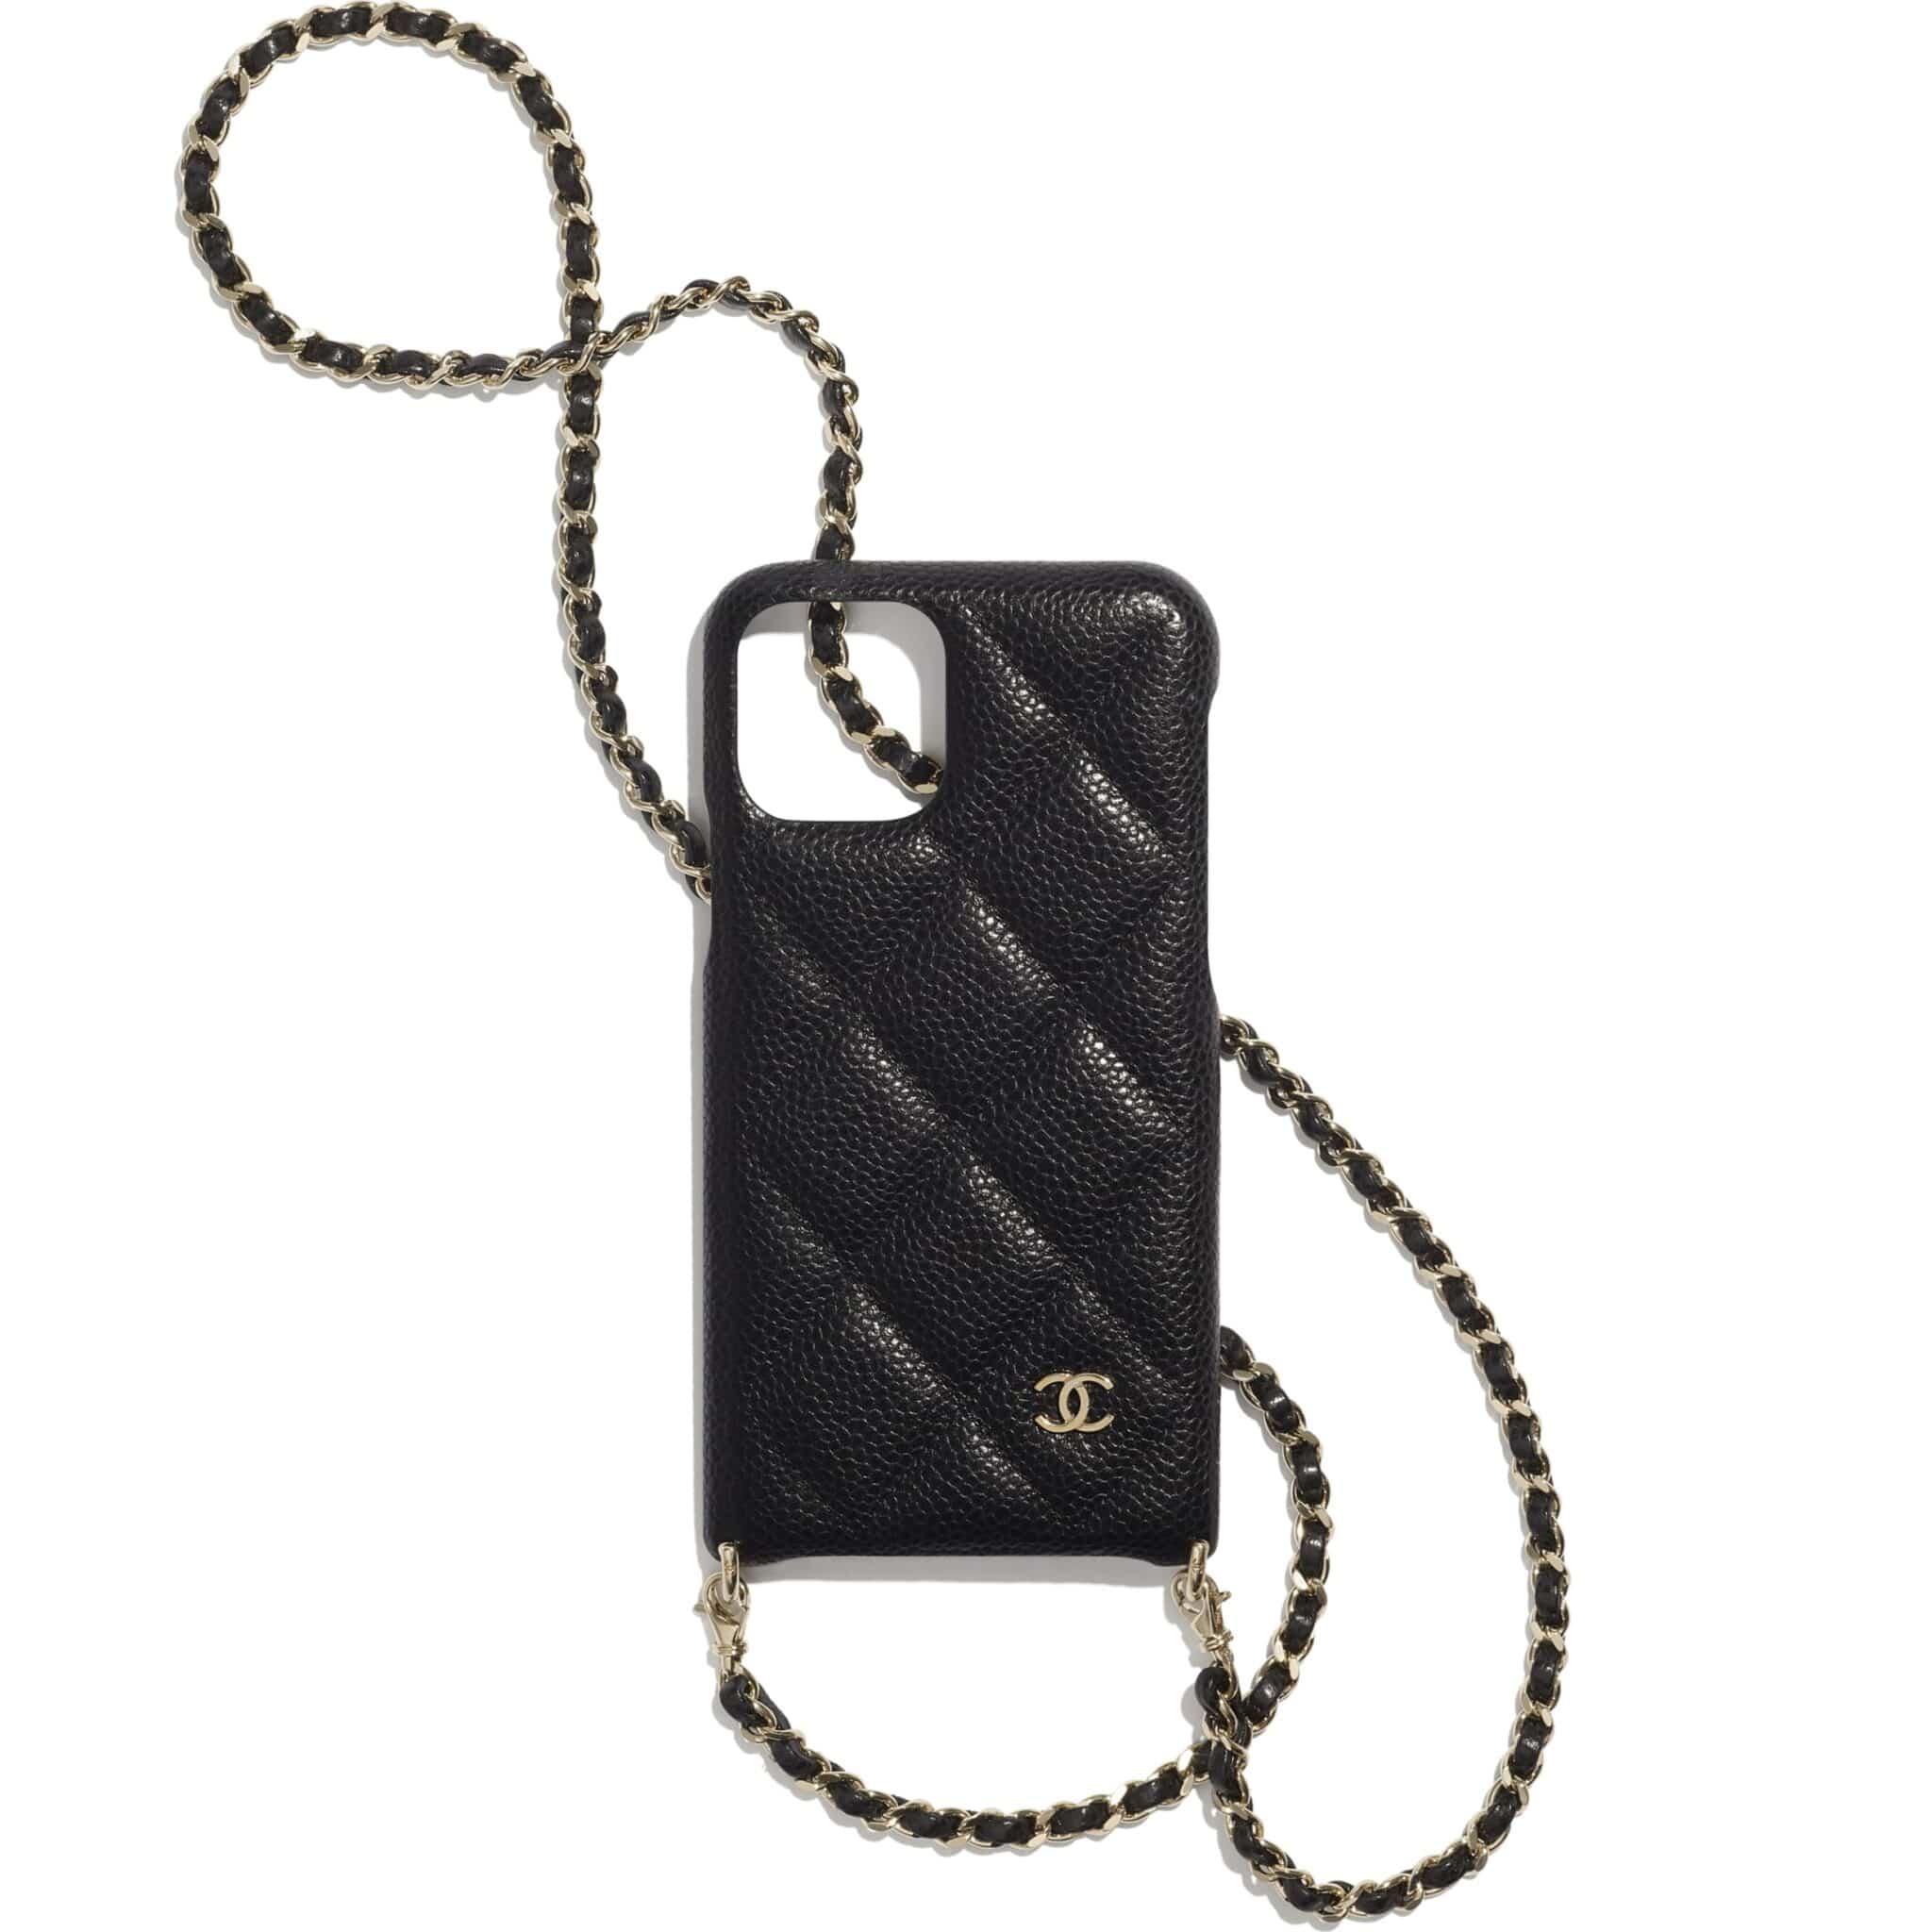 chanel iphone case 12 pro max